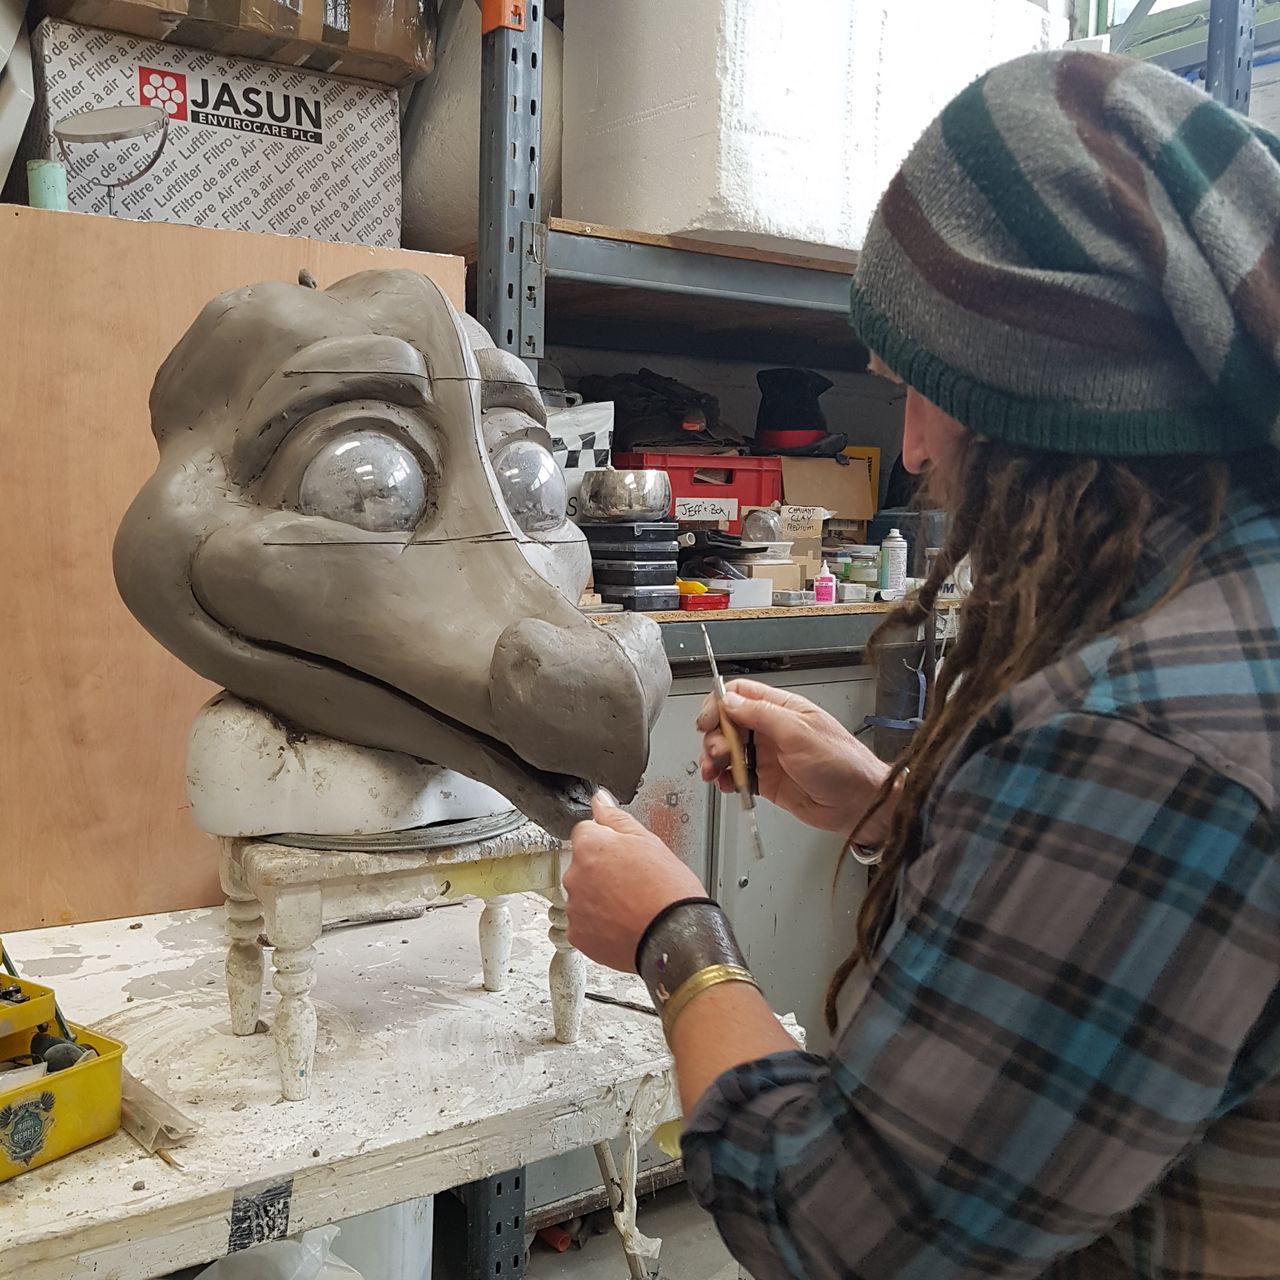 One of the Plunge Creations team gets to work on Dragon's mask